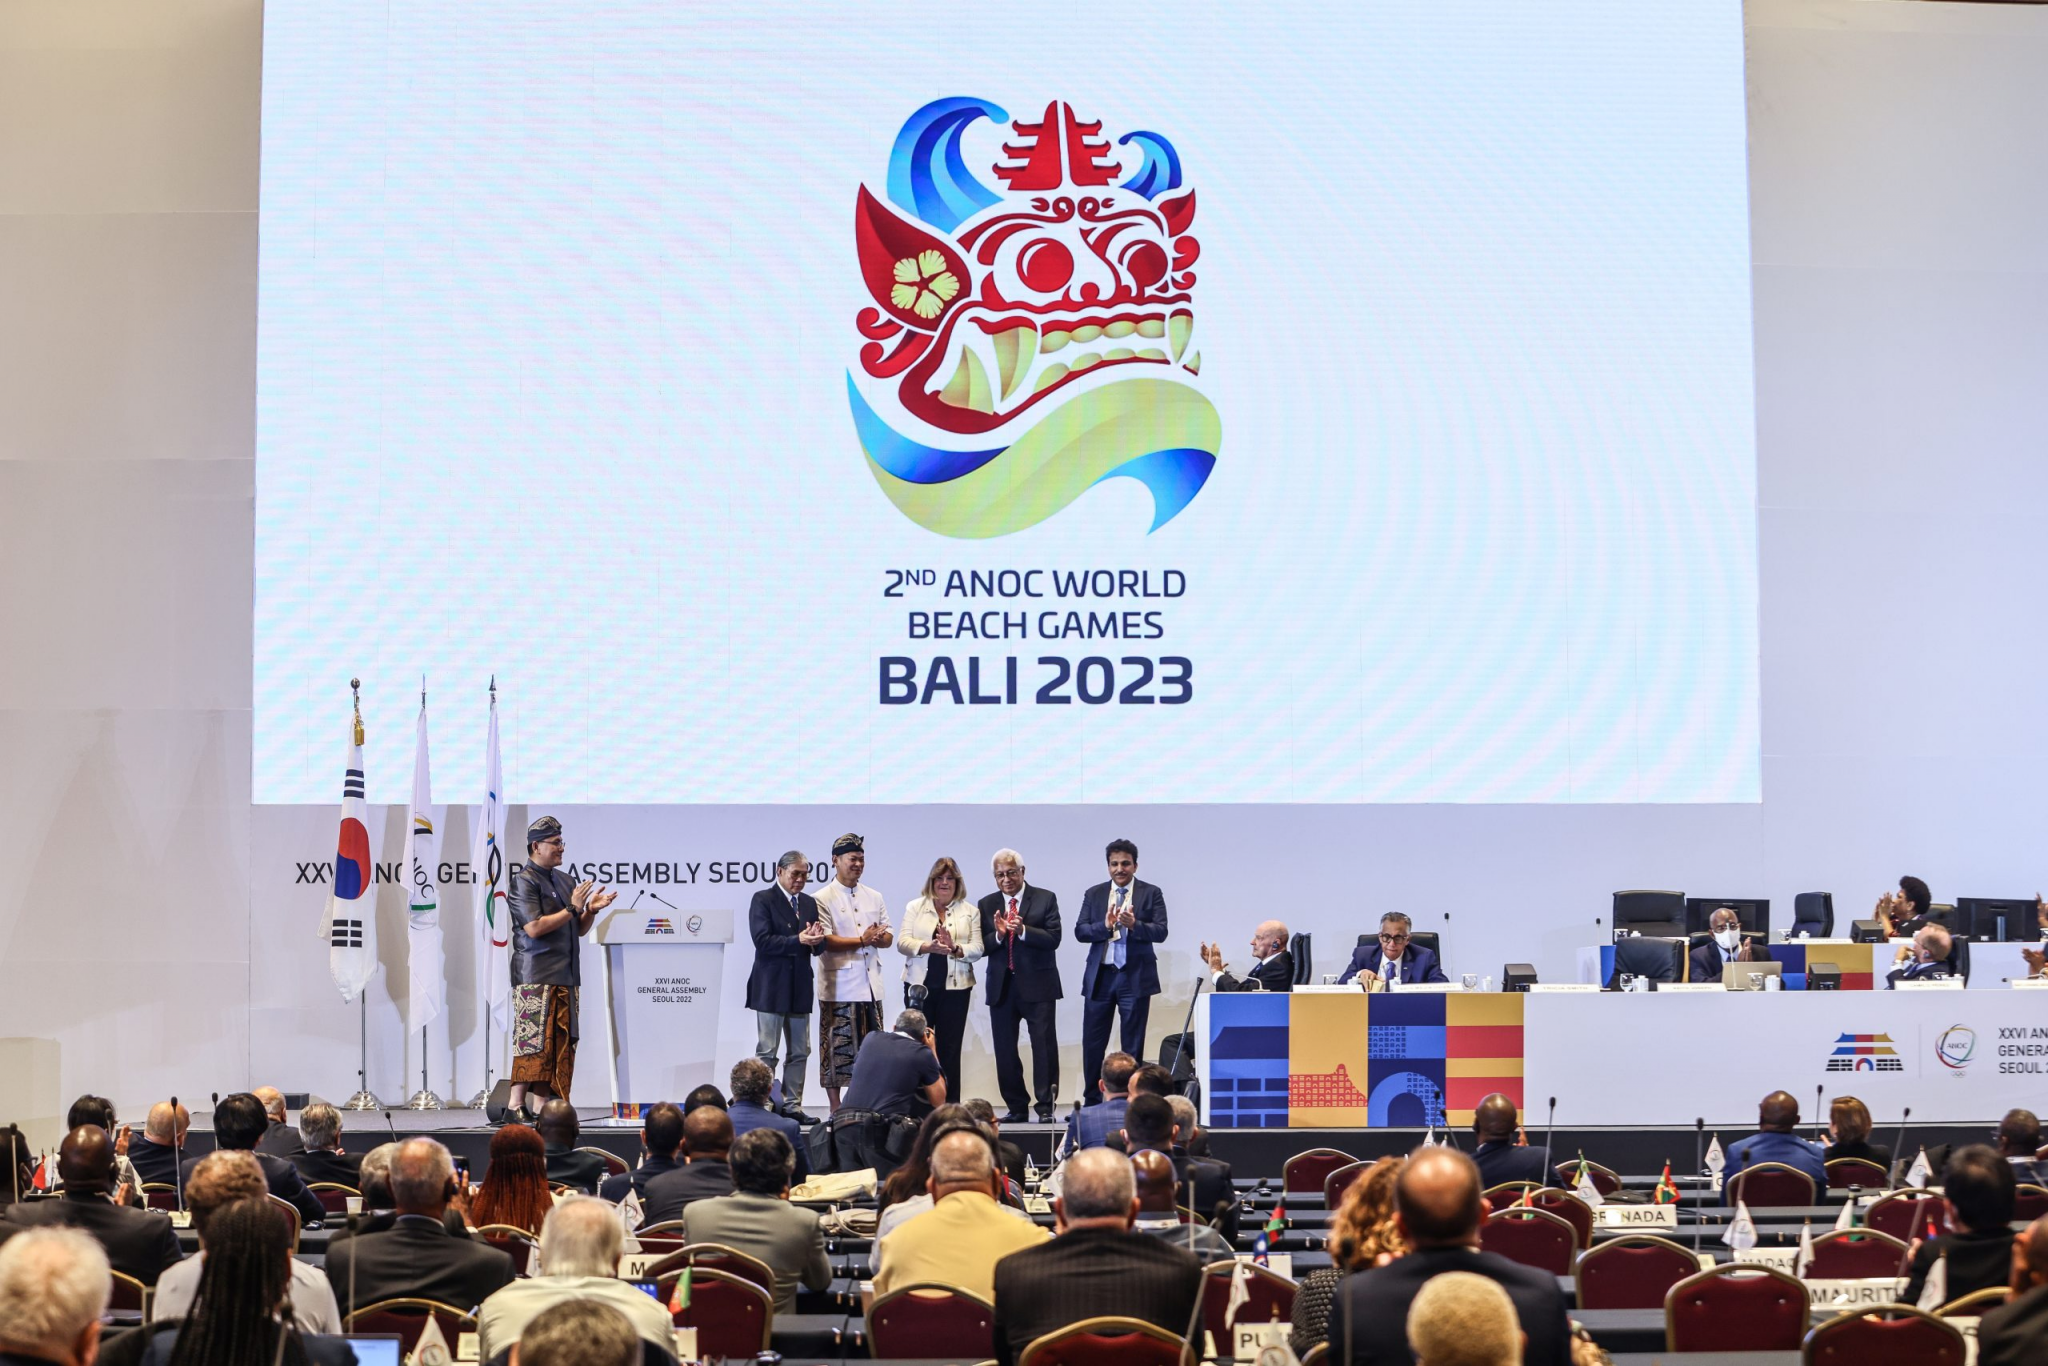 A host city contract for Bali to host the 2023 World Beach Games was signed during the ANOC General Assembly in Seoul last October ©ANOC